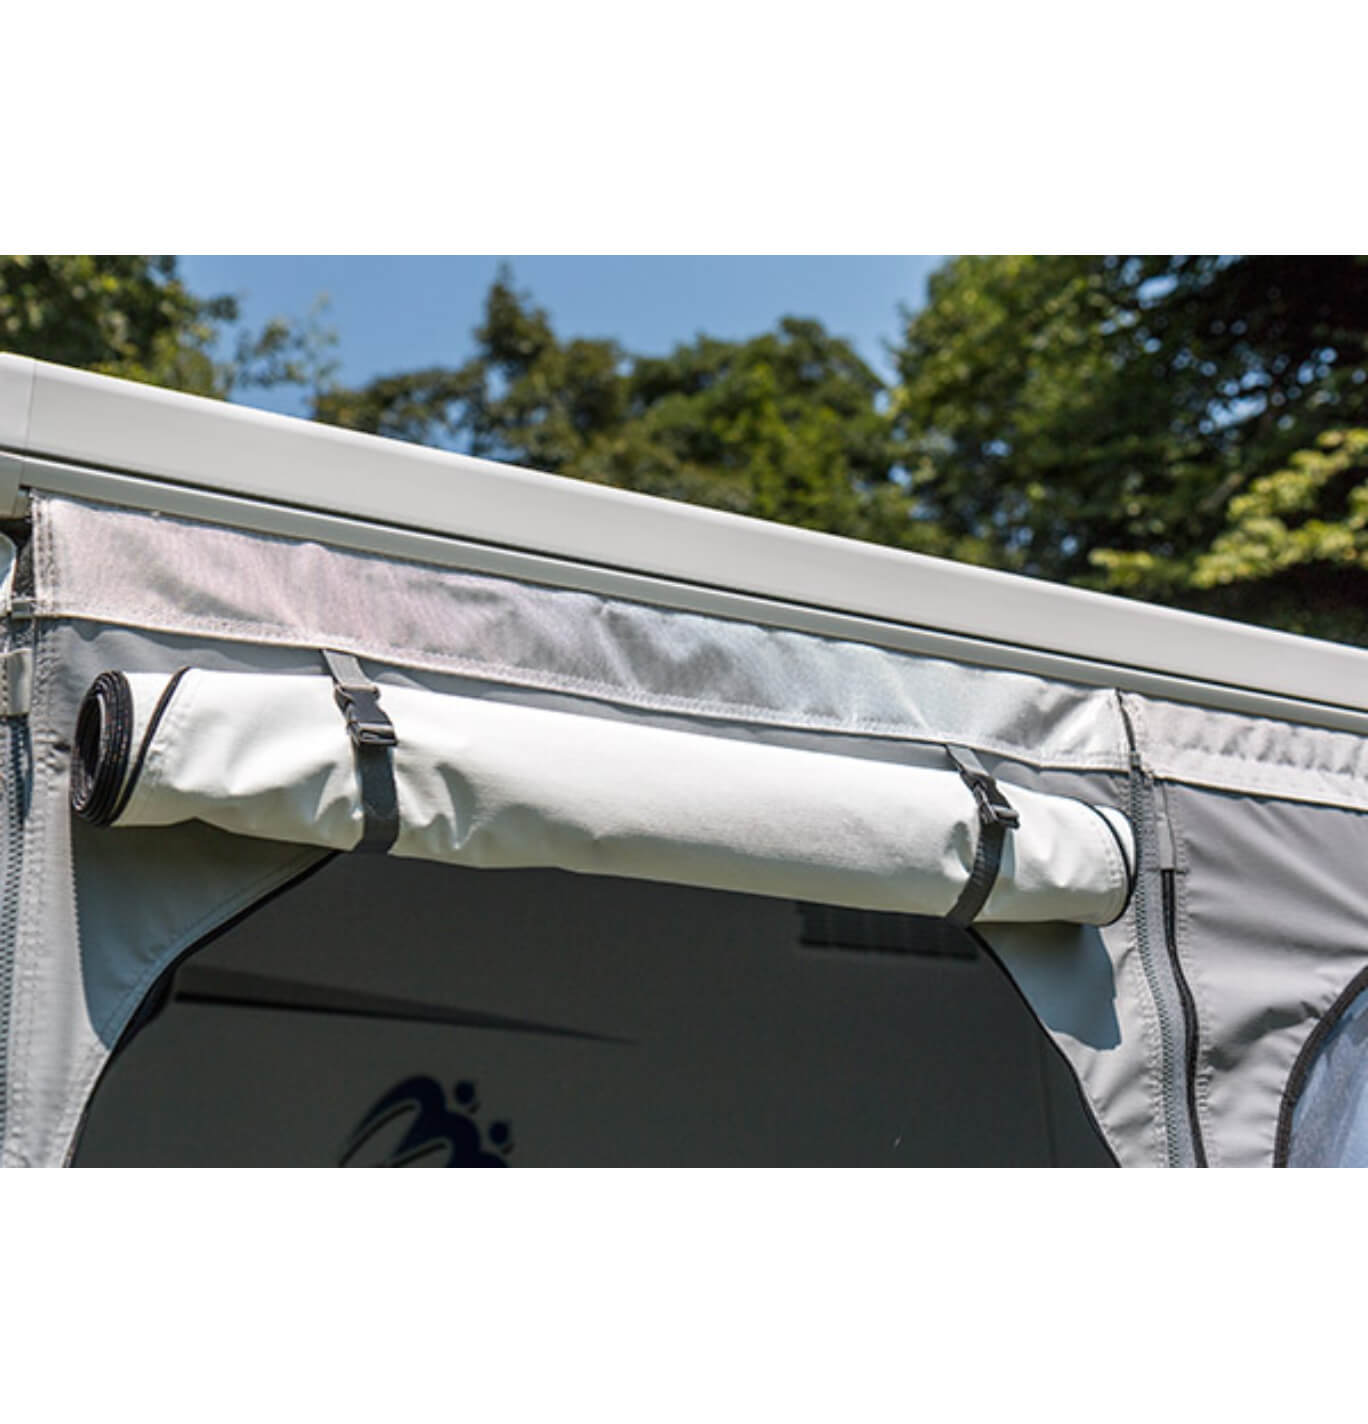 Fiamma Privacy Room Medium 300 for F45s Awnings | 08366A01- Image